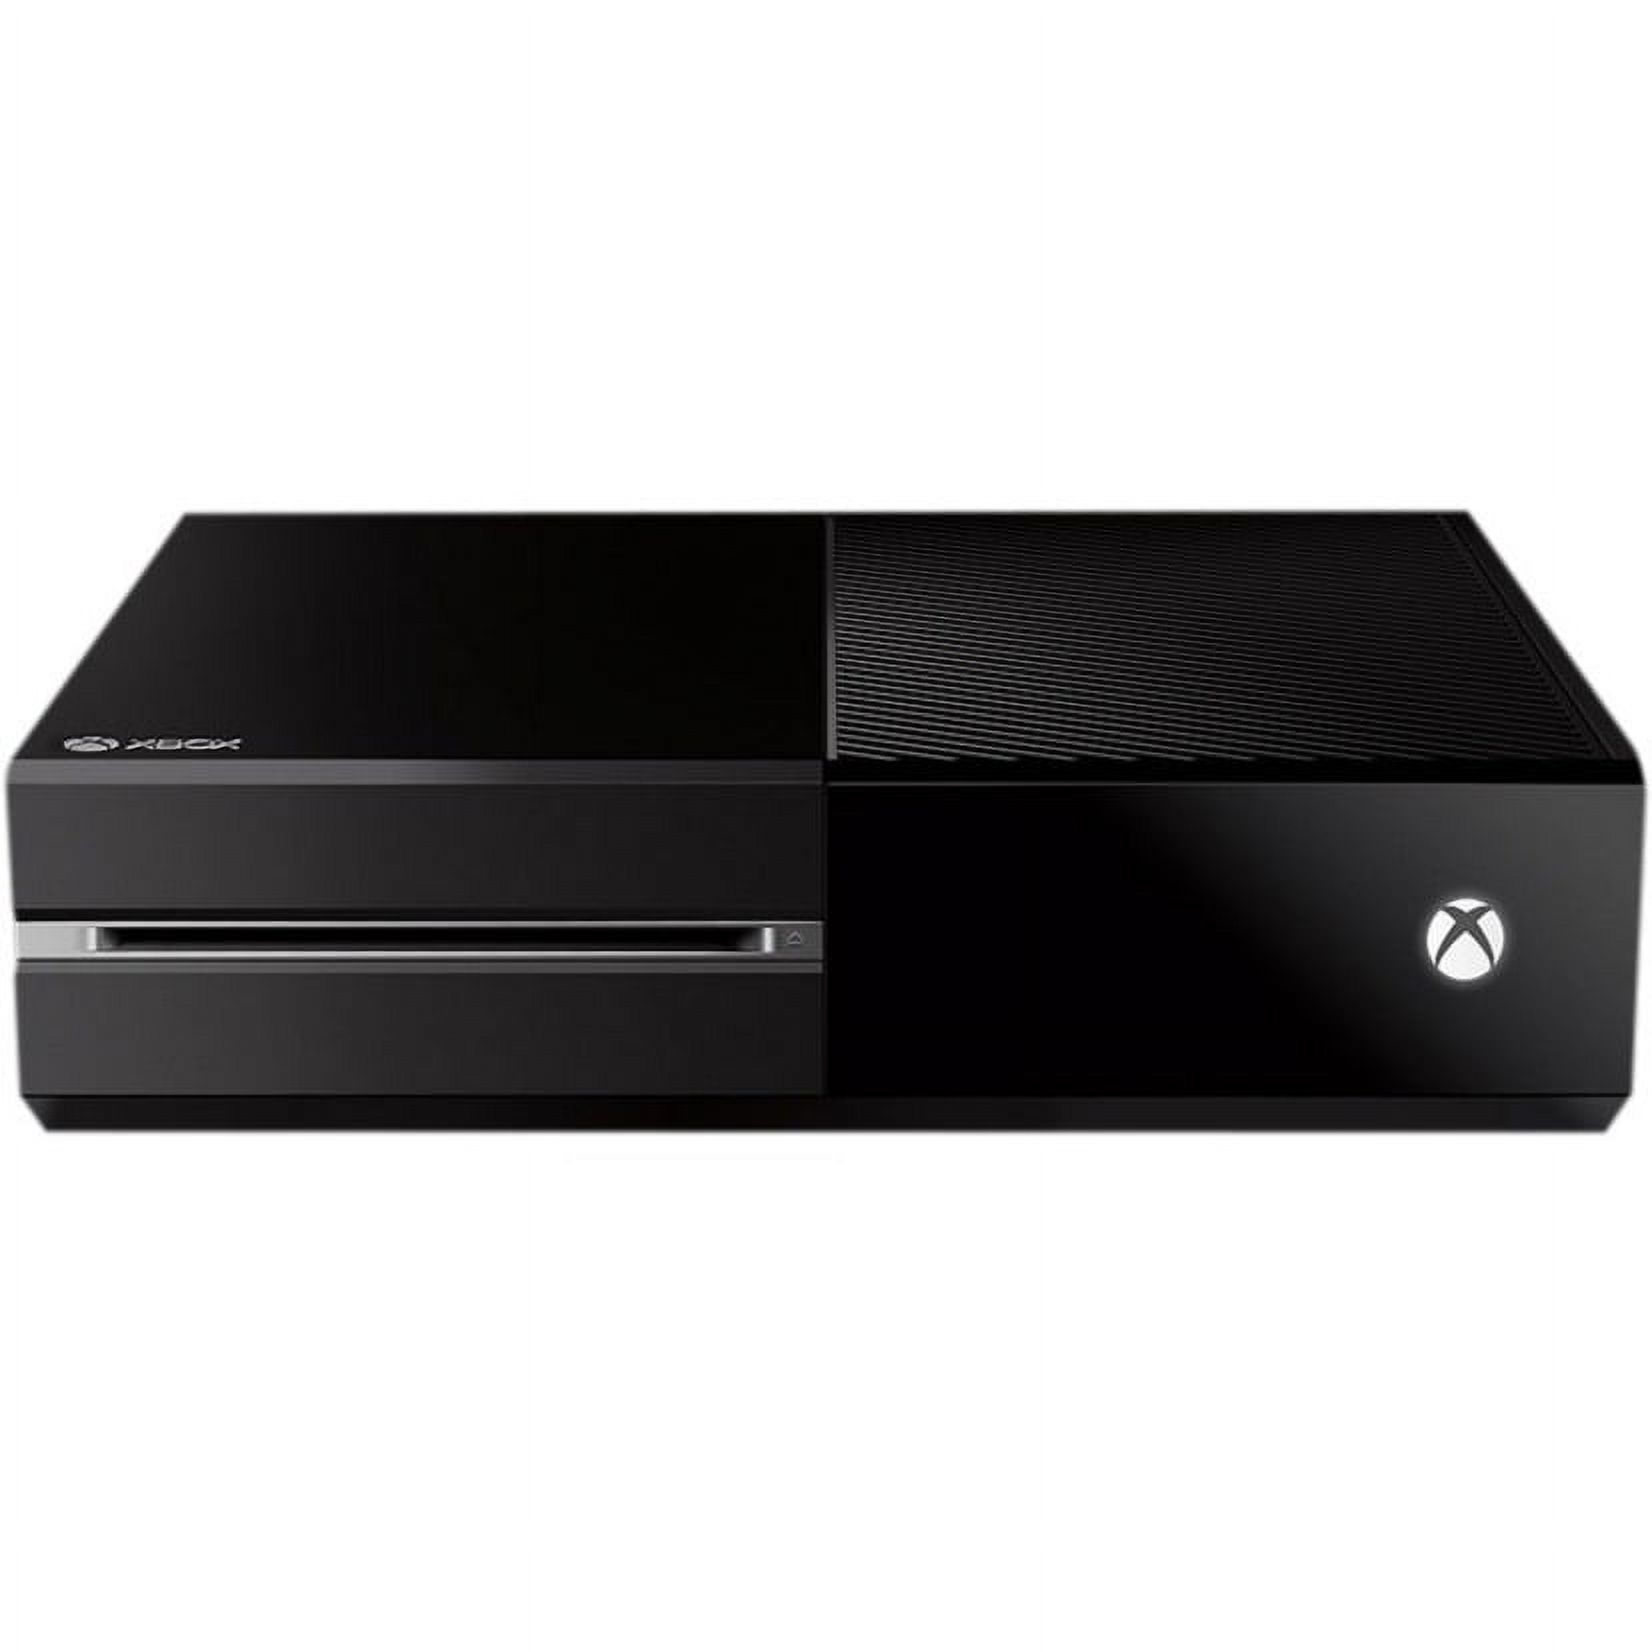 Microsoft Xbox One Gaming Console - image 3 of 4